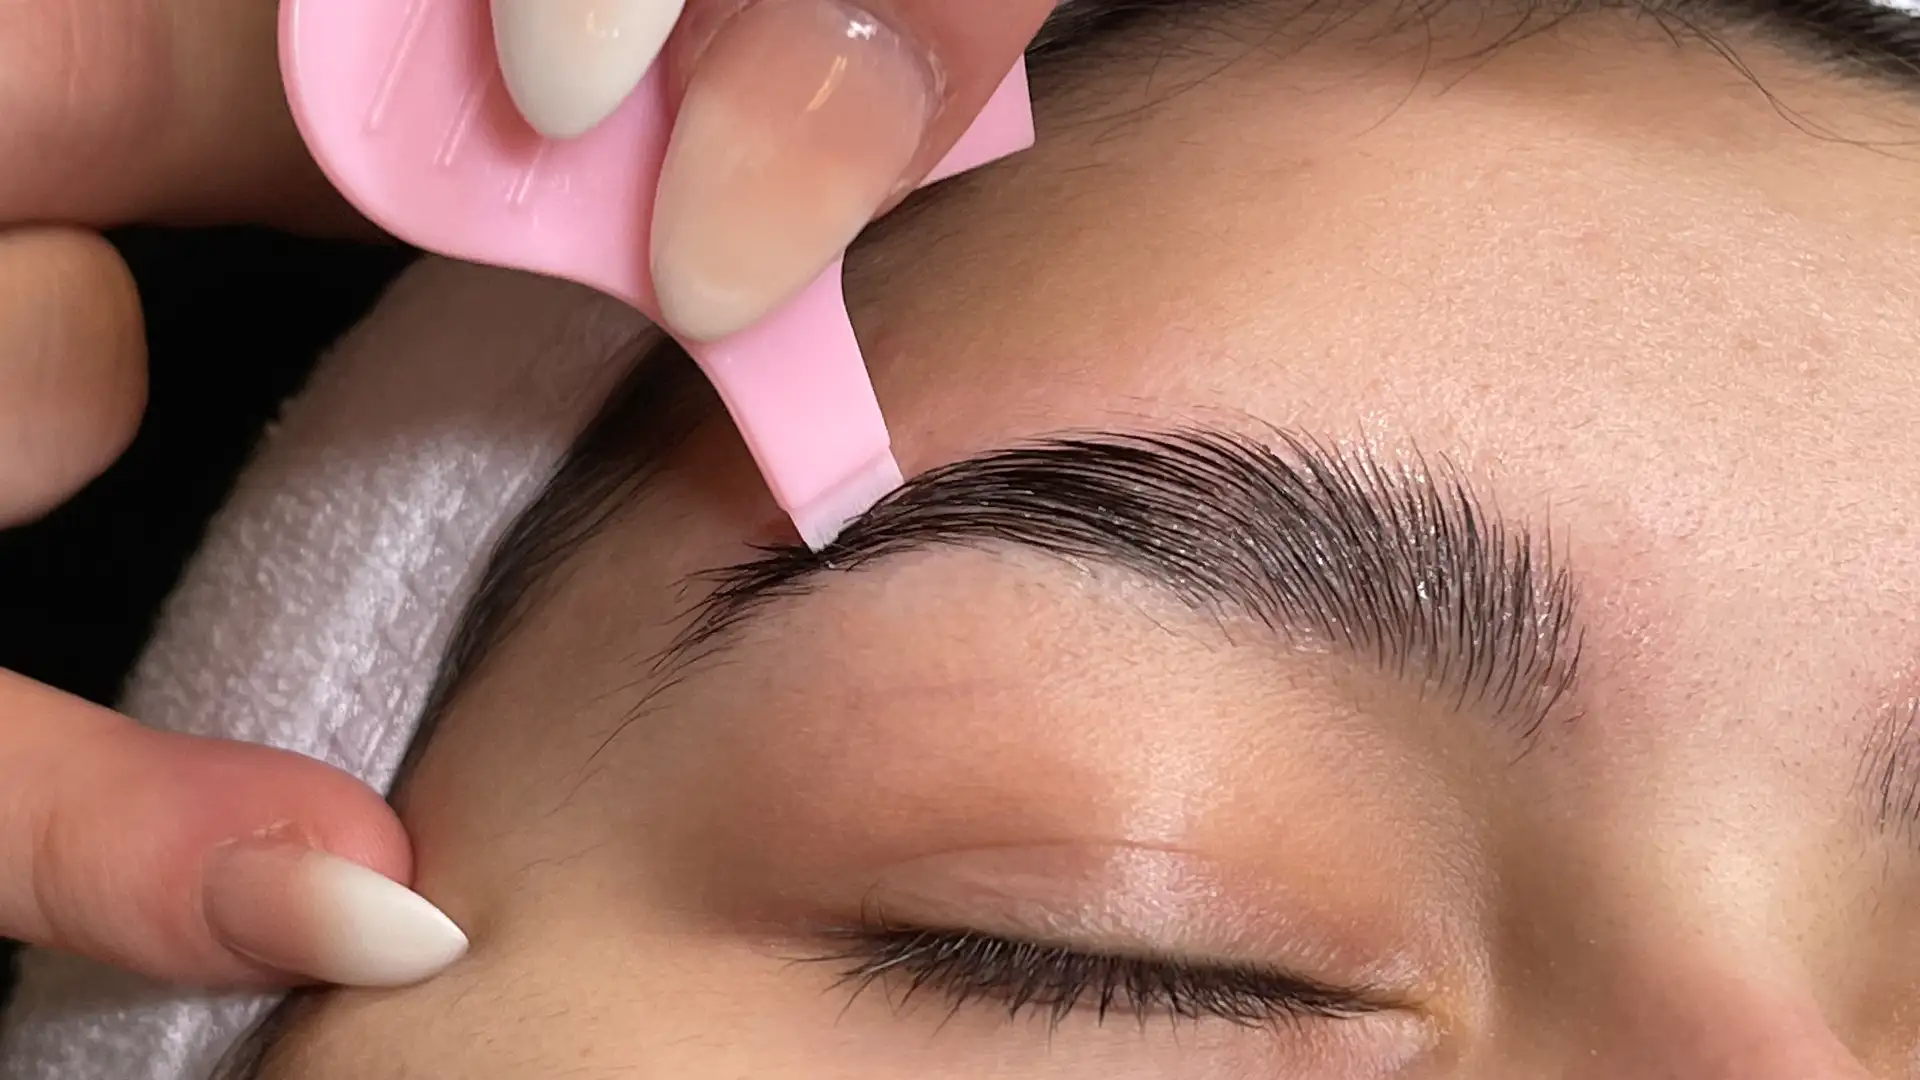 Brow Lamination Aftercare